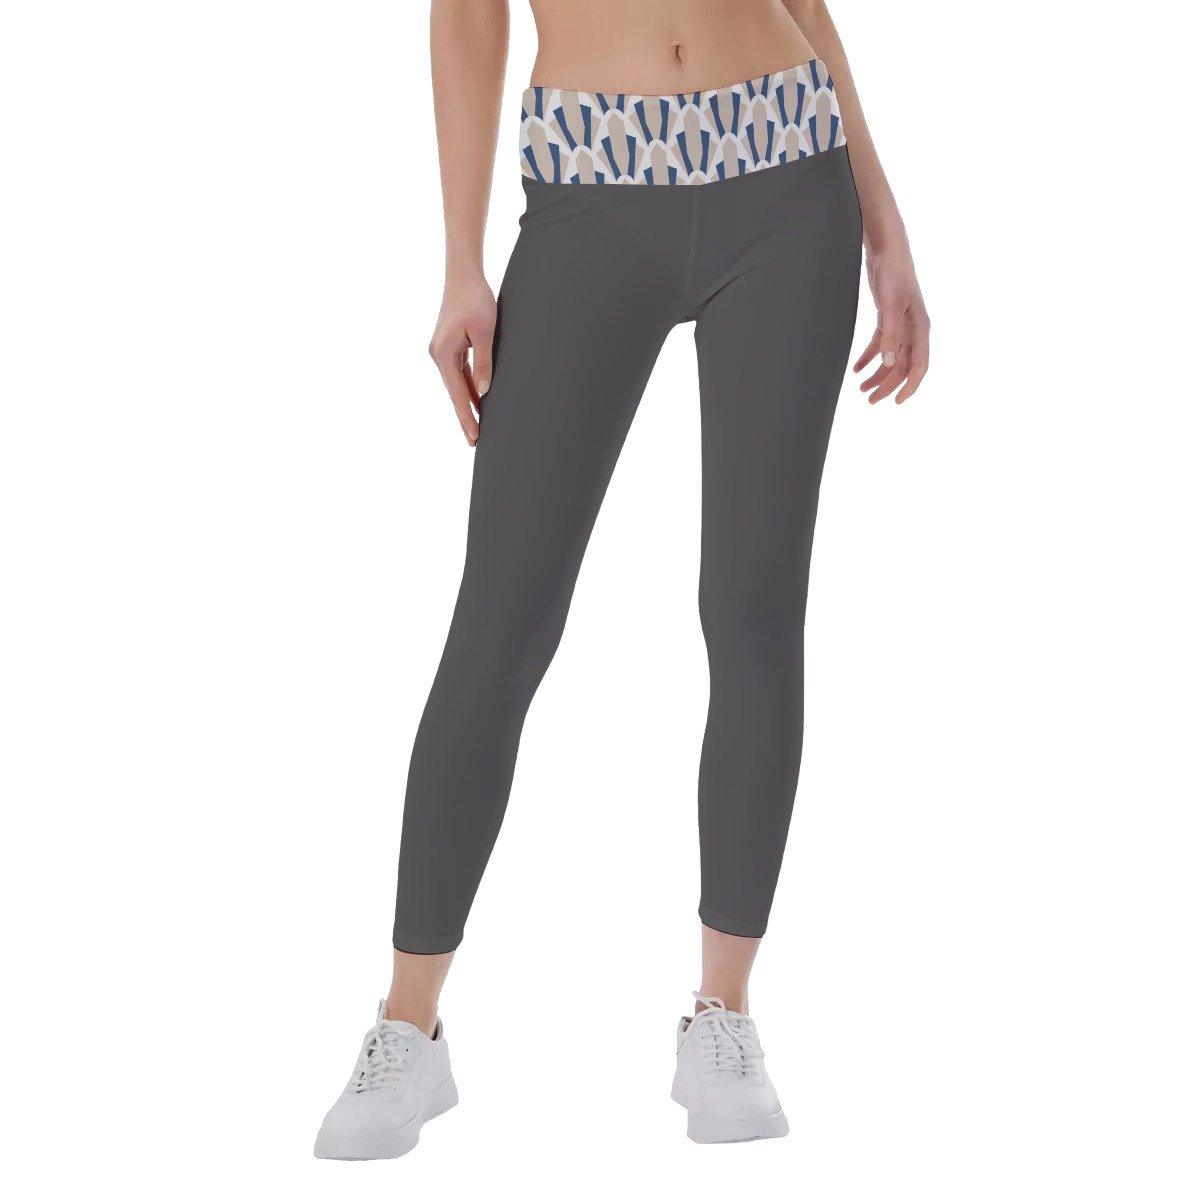 Fashionable  Women's Yoga and Sports Leggings - Personal Hour for Yoga and Meditations 